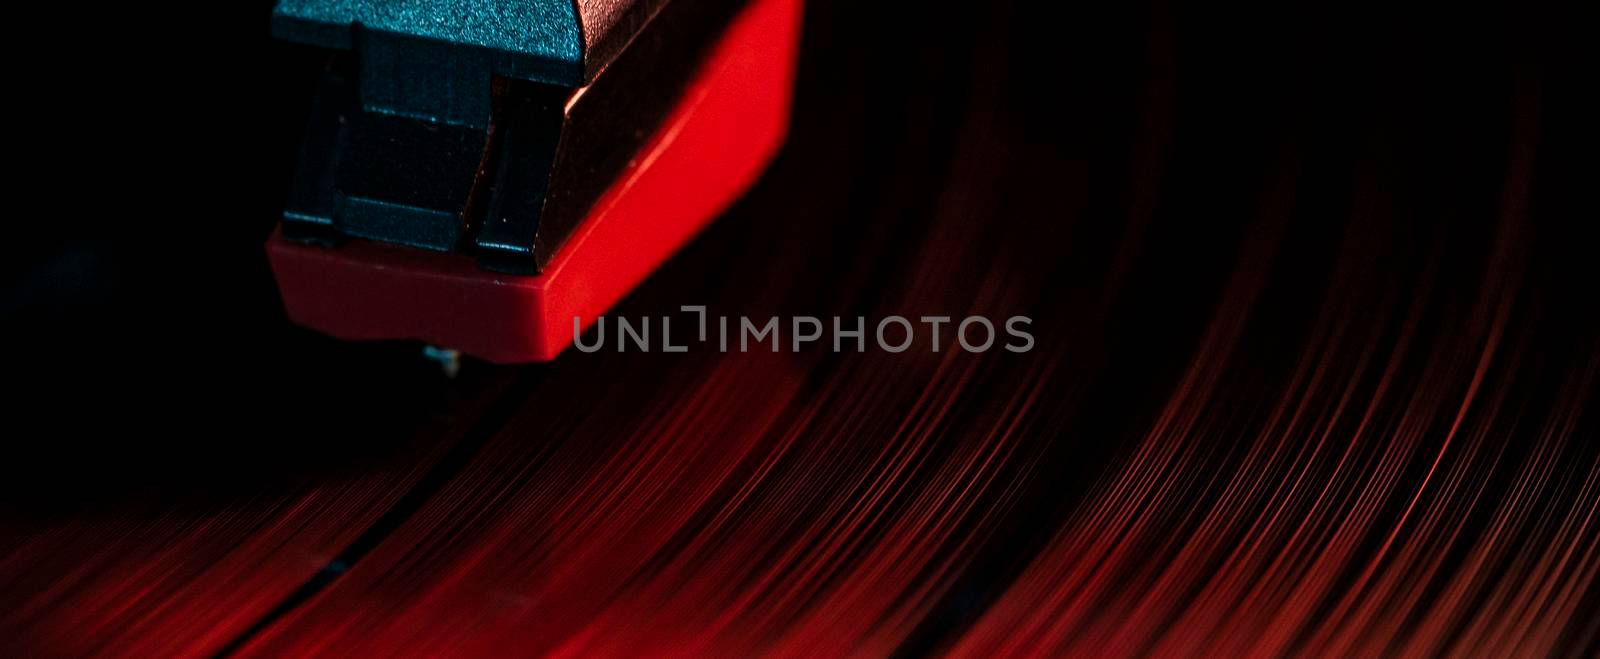 Macro Detail of needle on vinyl record 4 by pippocarlot